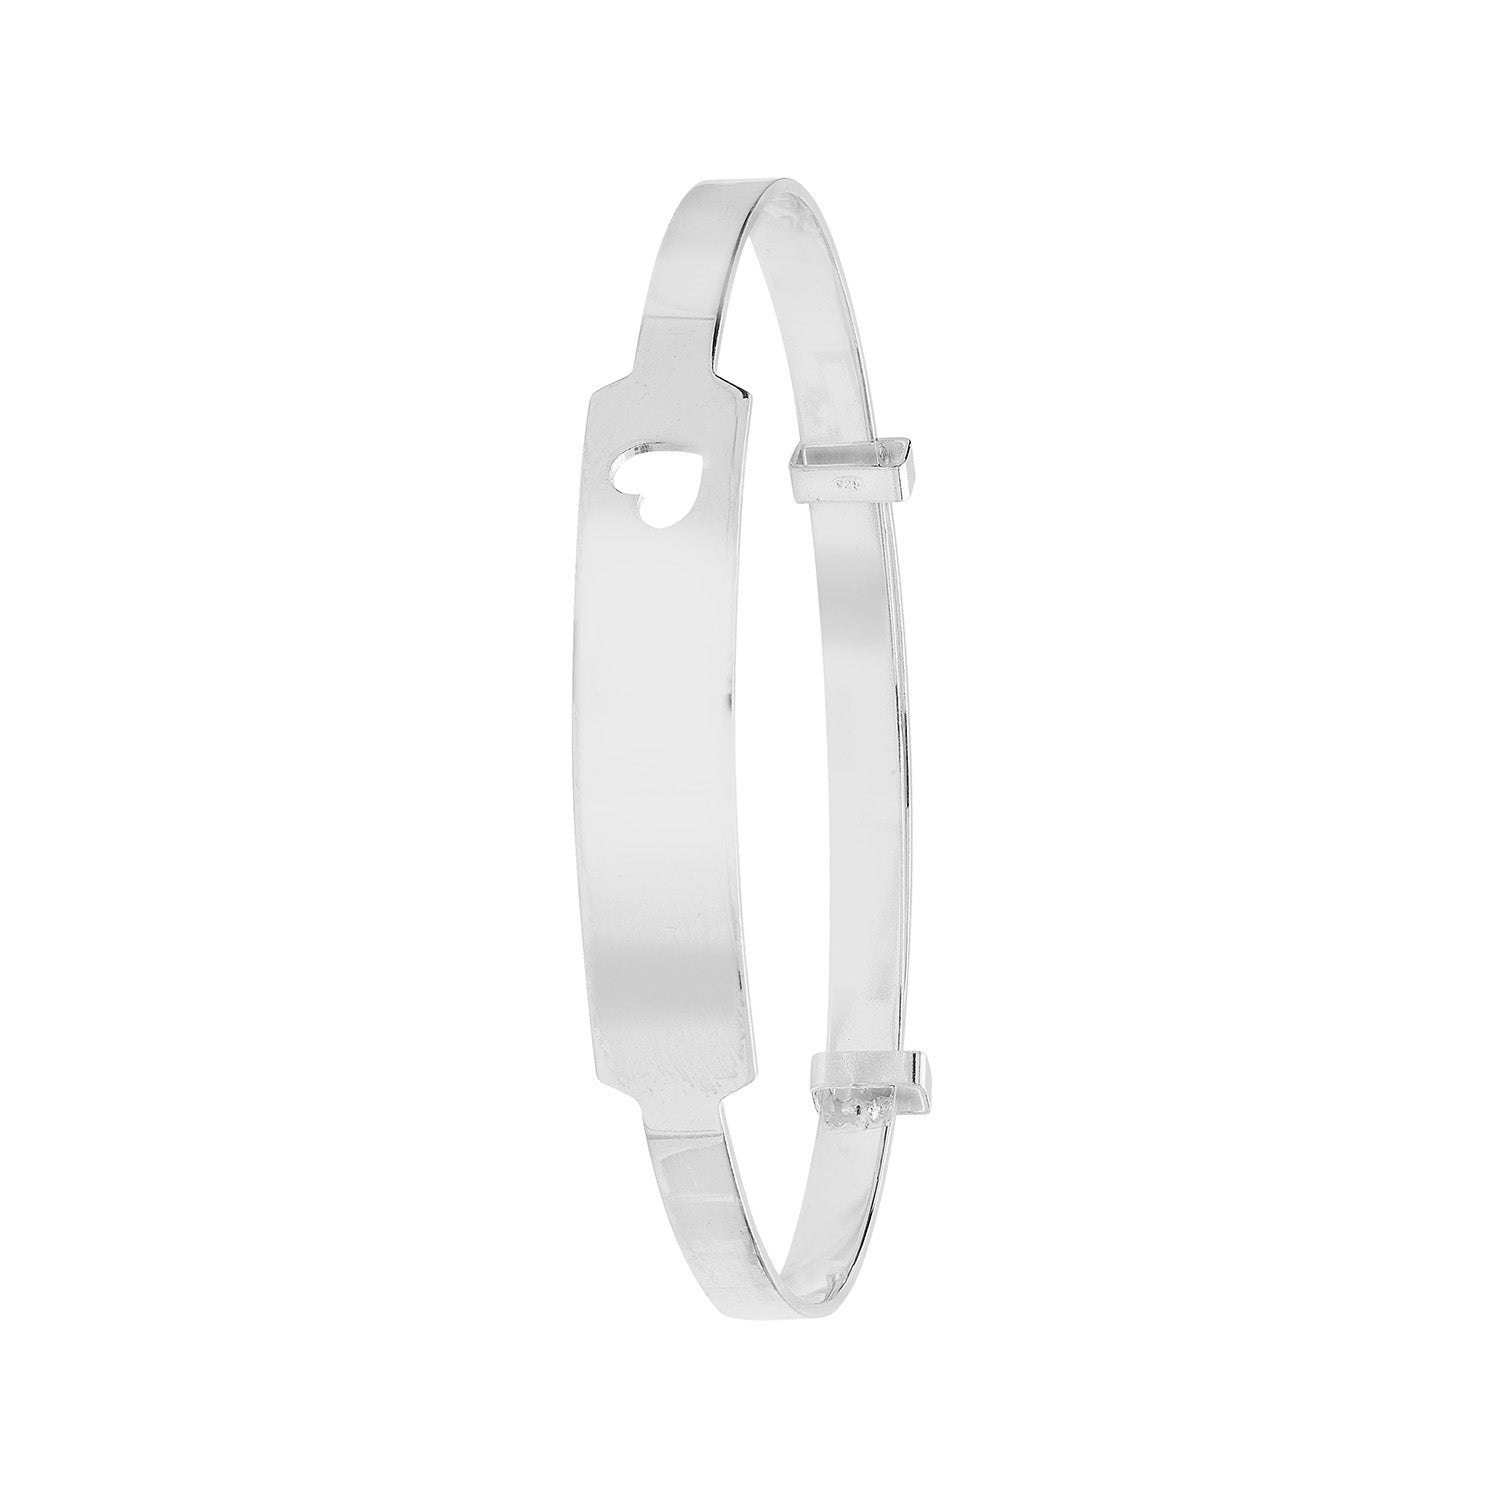 SILVER BABIES' CUT OUT HEART EXPANDABLE ID BANGLE